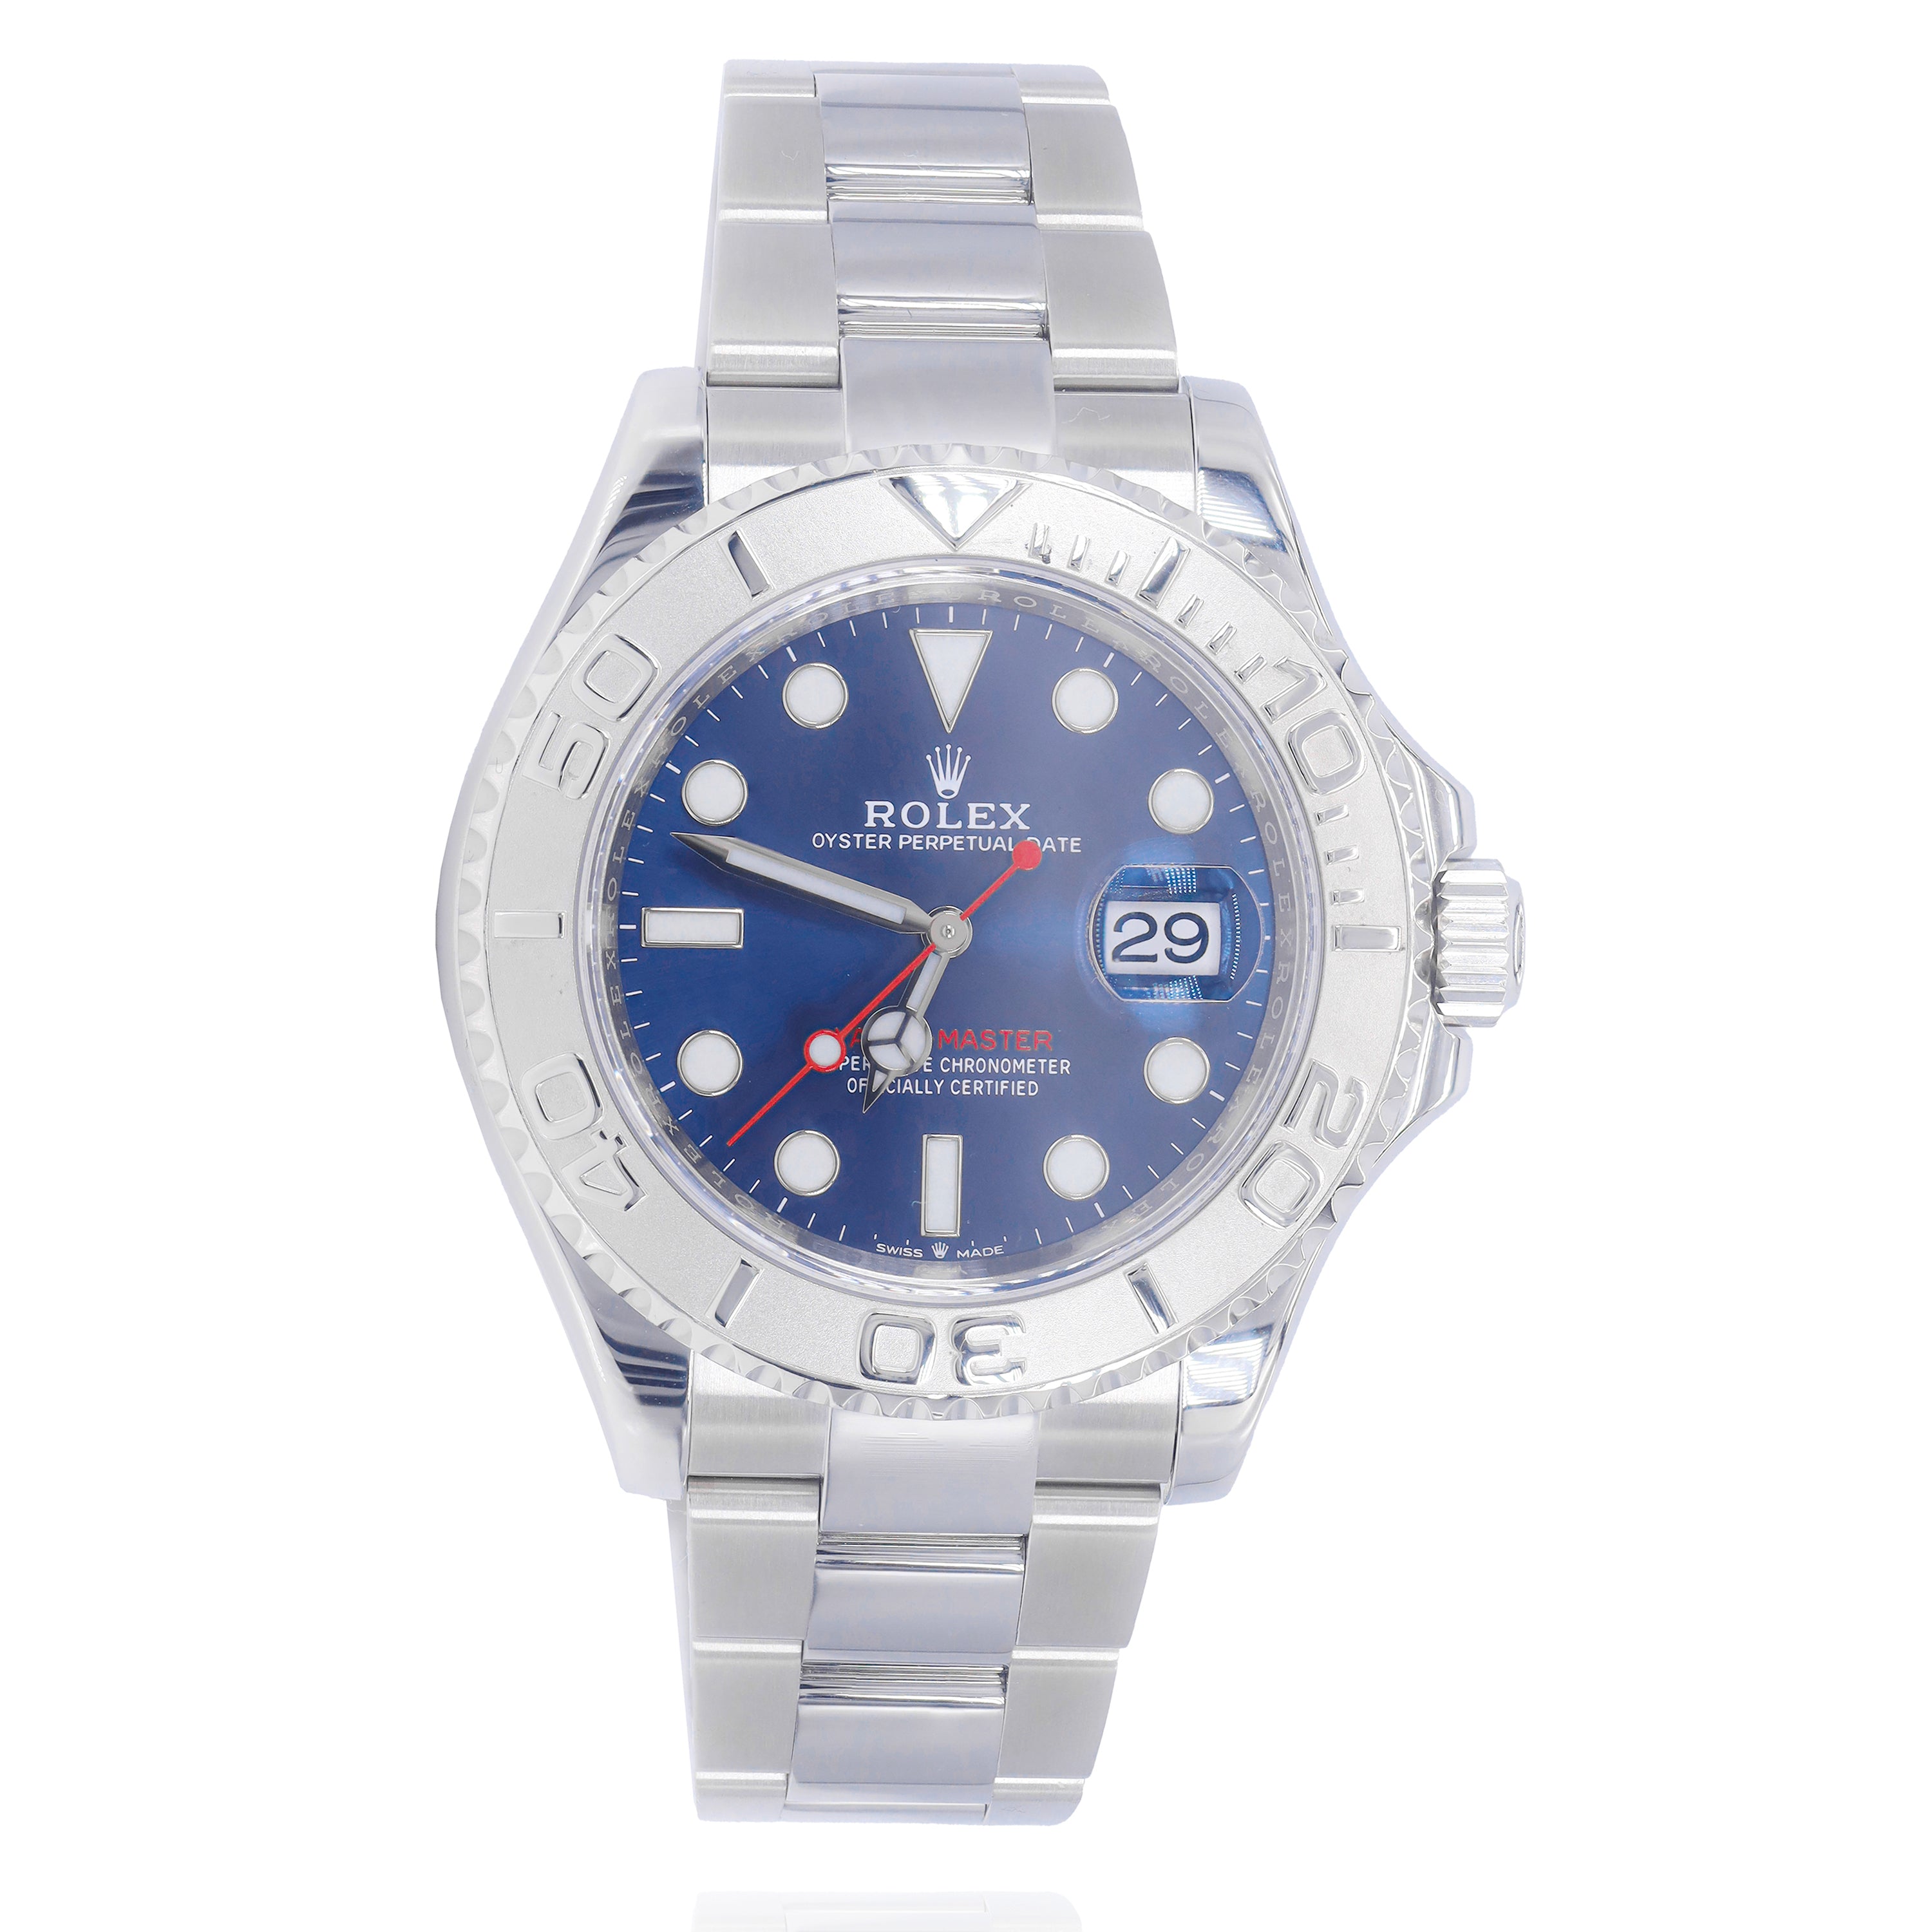 Rolex 116622 Yacht-Master I 40mm Bright Blue Dial Oyster Men's Watch